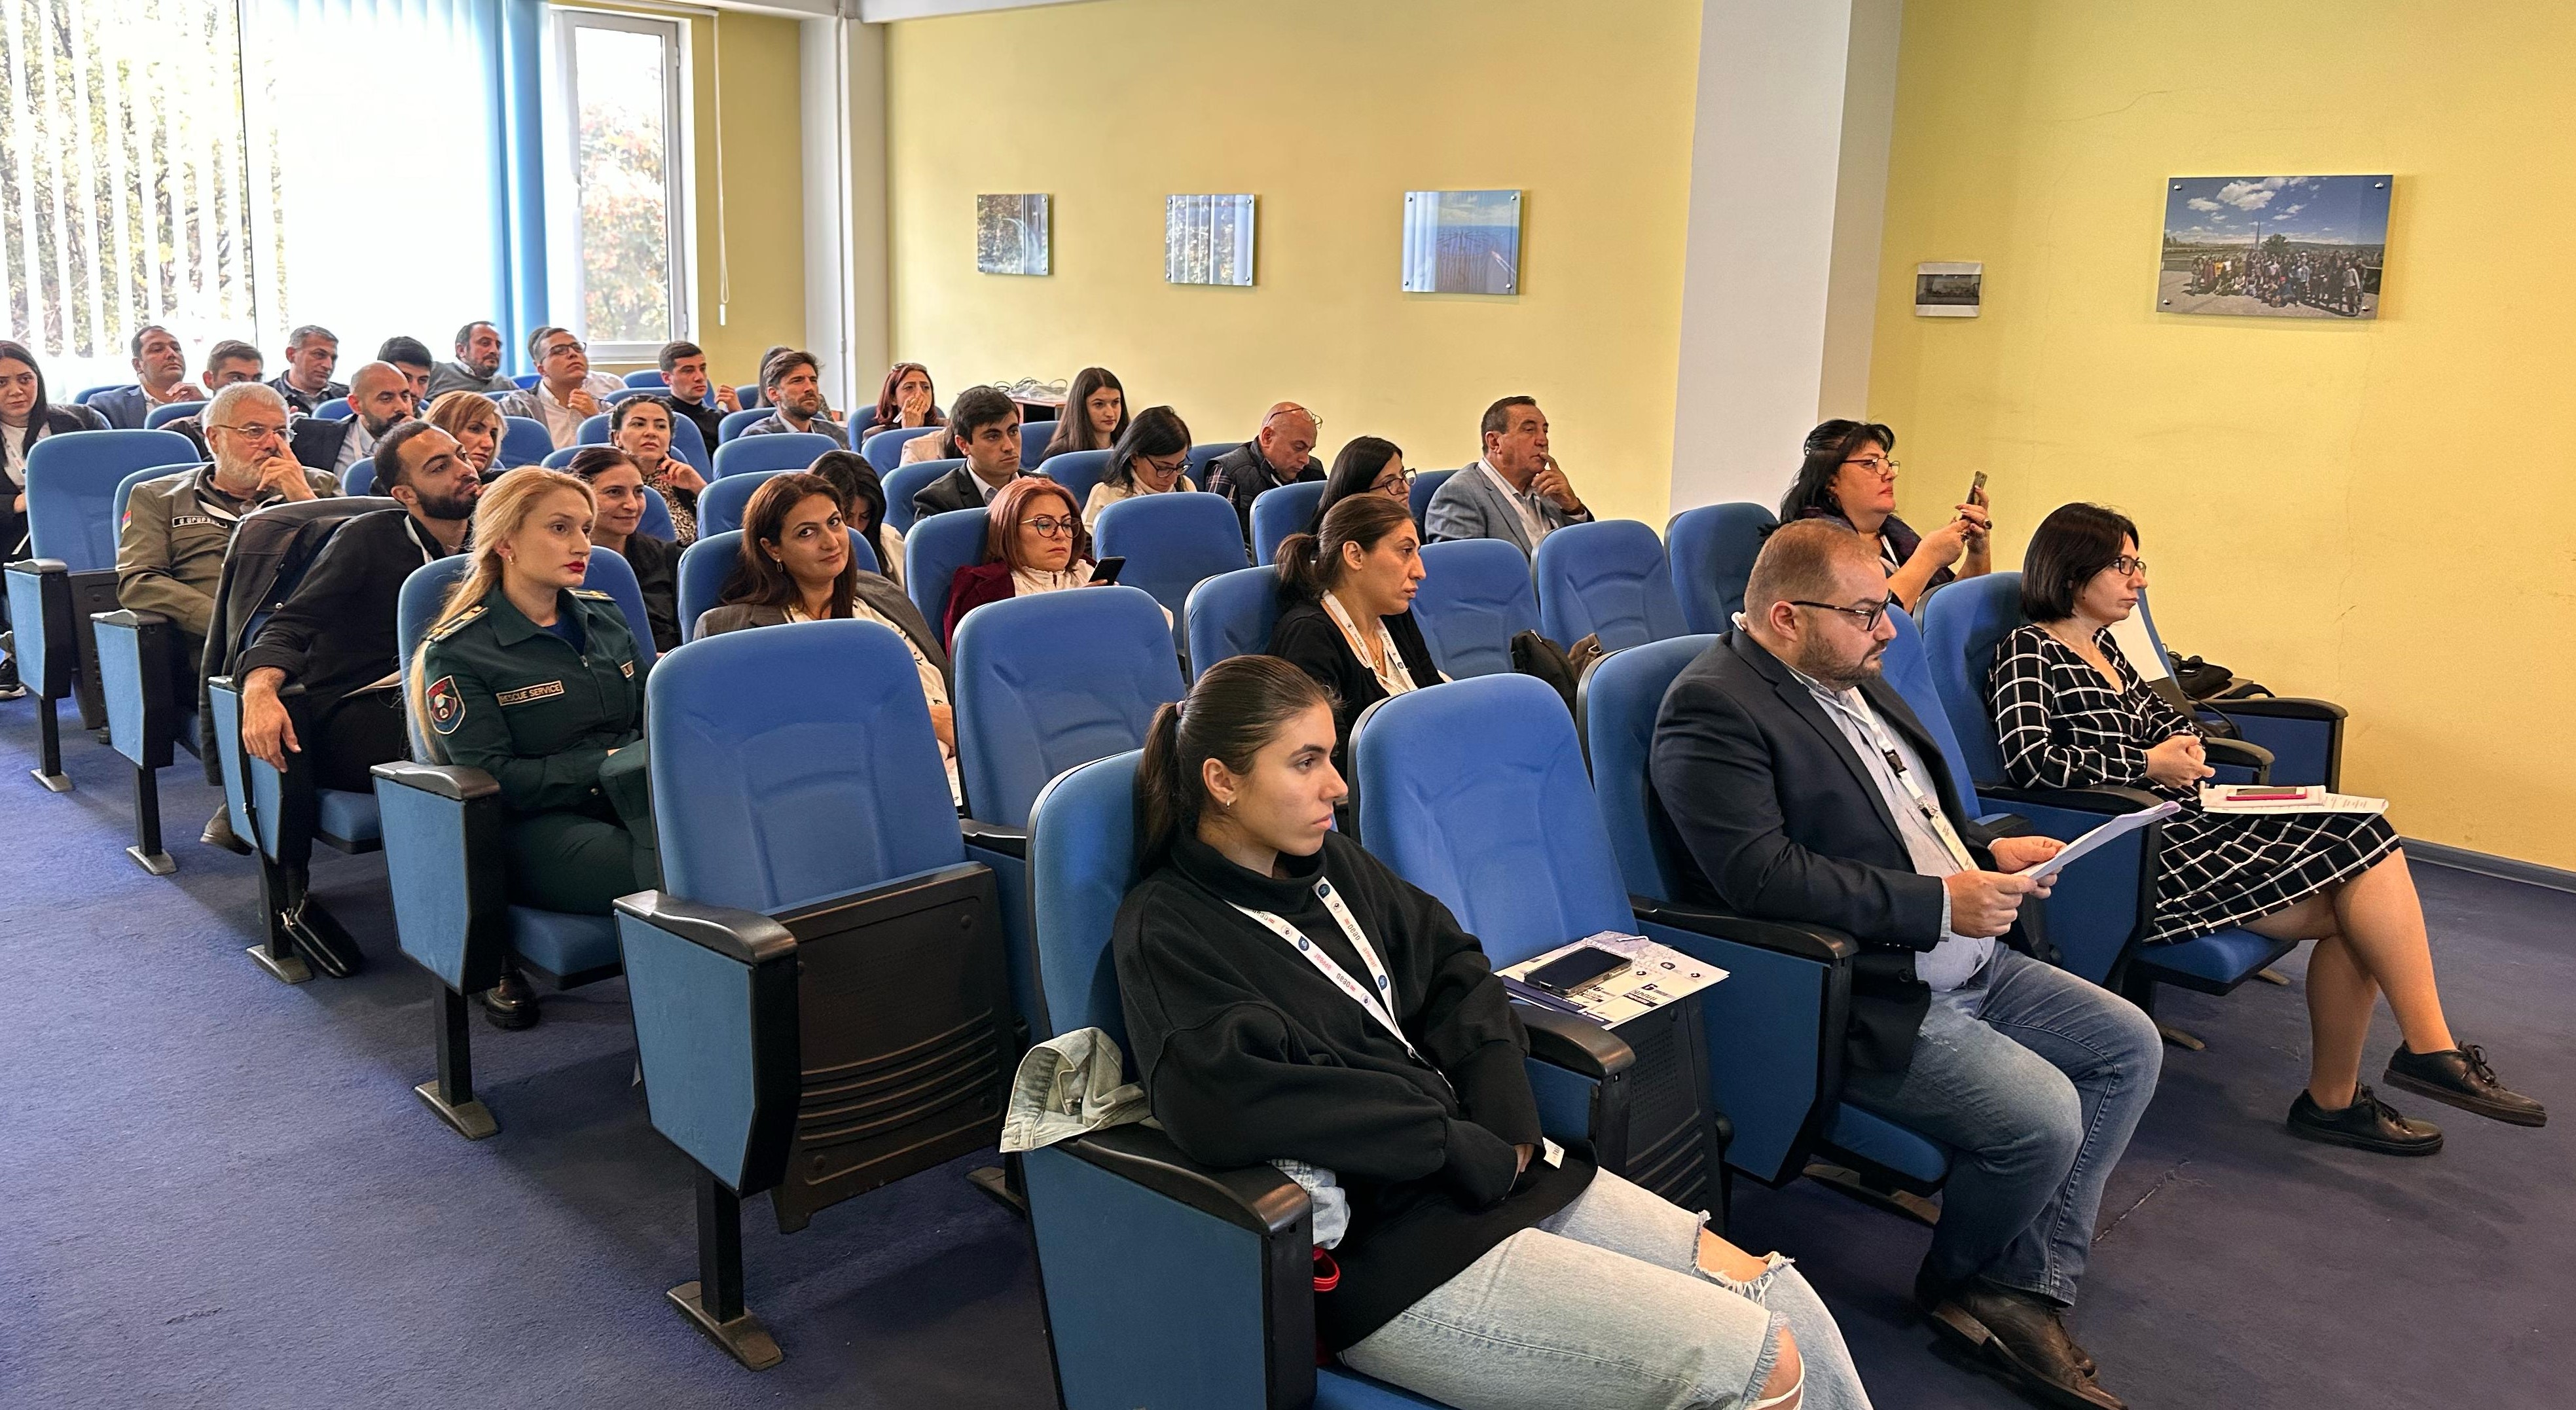 Workshop on Research and Innovation was held at Yerevan State University (YSU) in Yerevan, Armenia